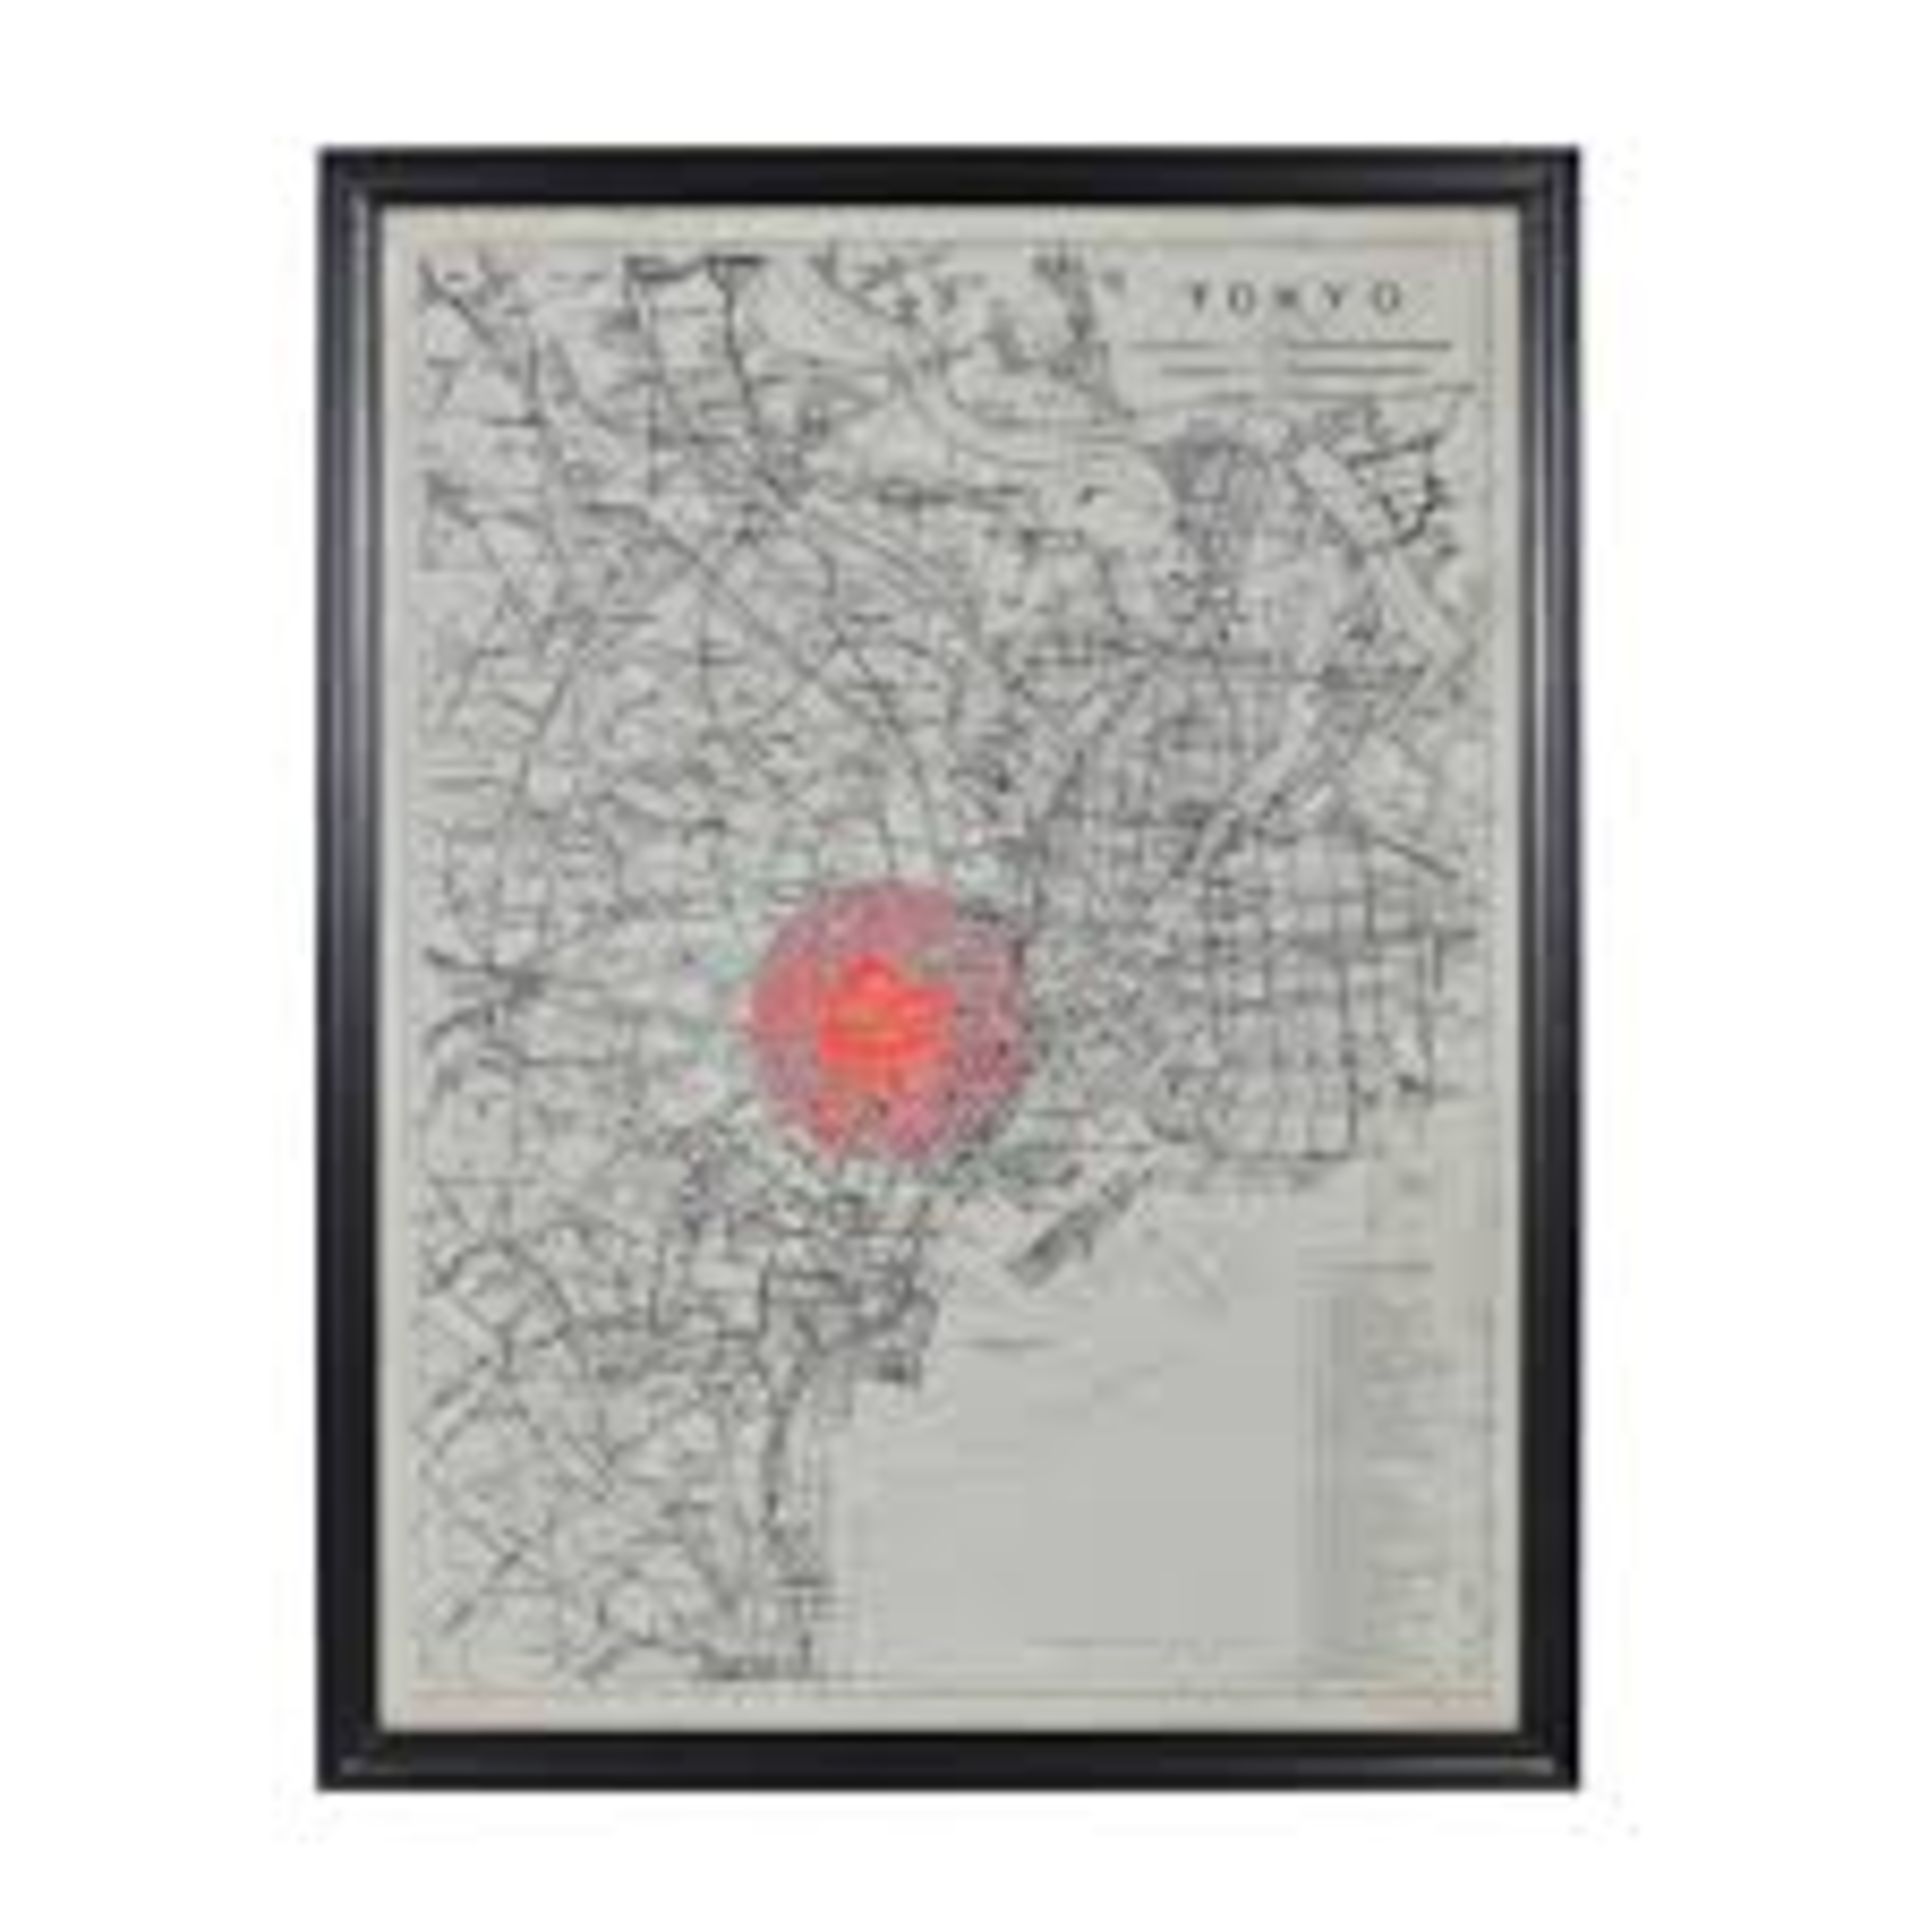 Maps Tokyo These Framed City Maps Pay Homage To Each City’s History And The Life Stories Of Its - Image 2 of 2